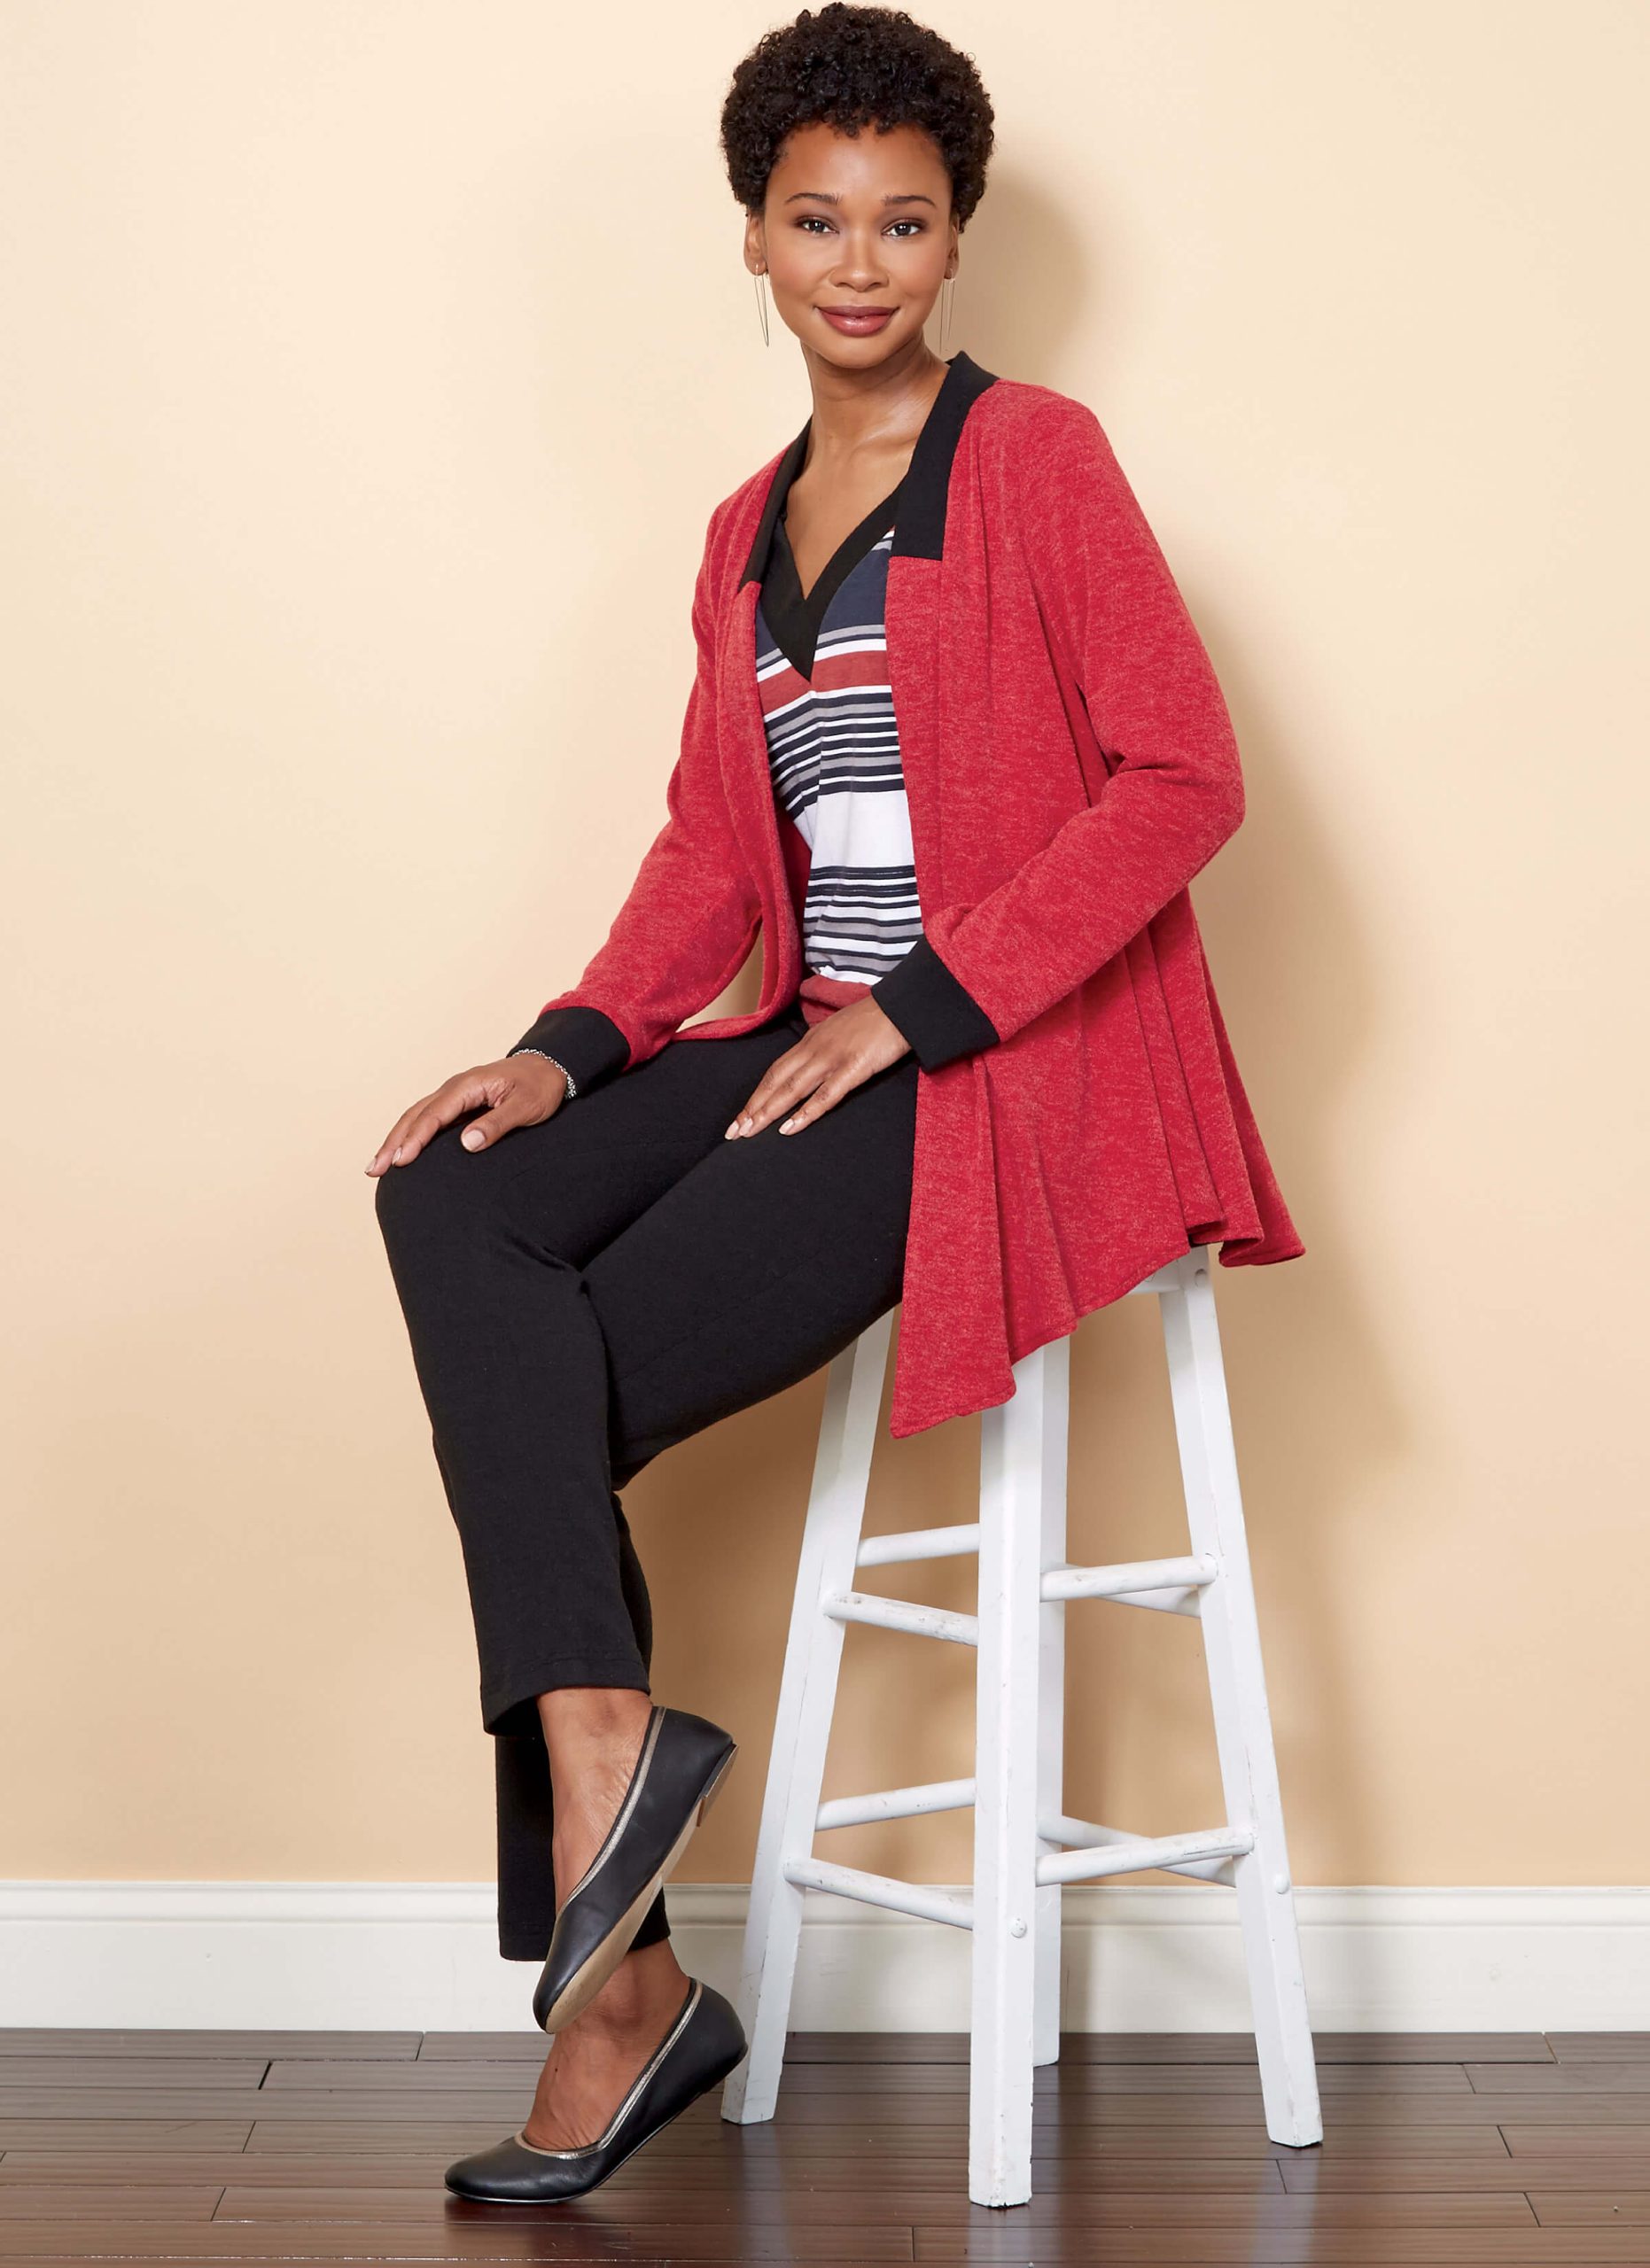 Butterick Sewing Pattern B6528 Misses' Knit Jacket, Top, Shorts and Pants